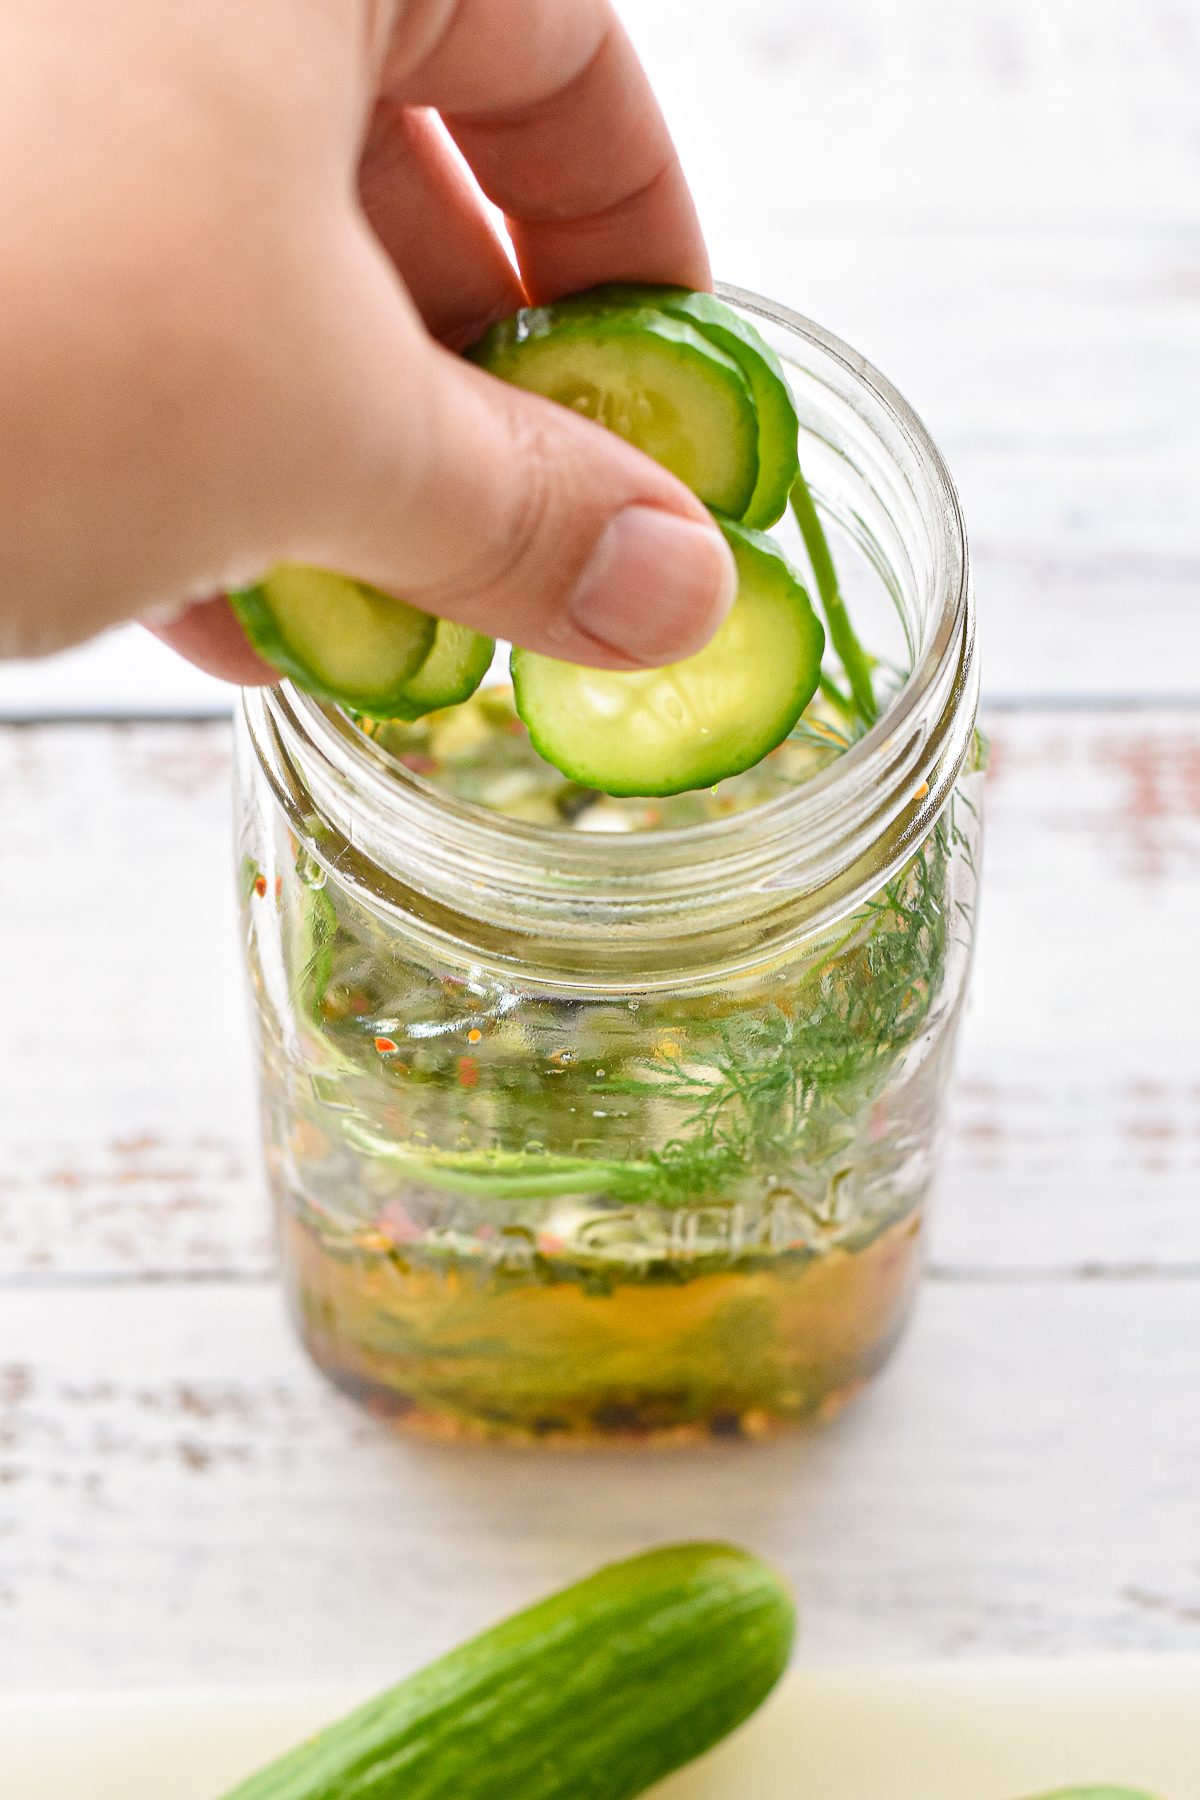 process of adding cucumbers to jar containing pickle brine